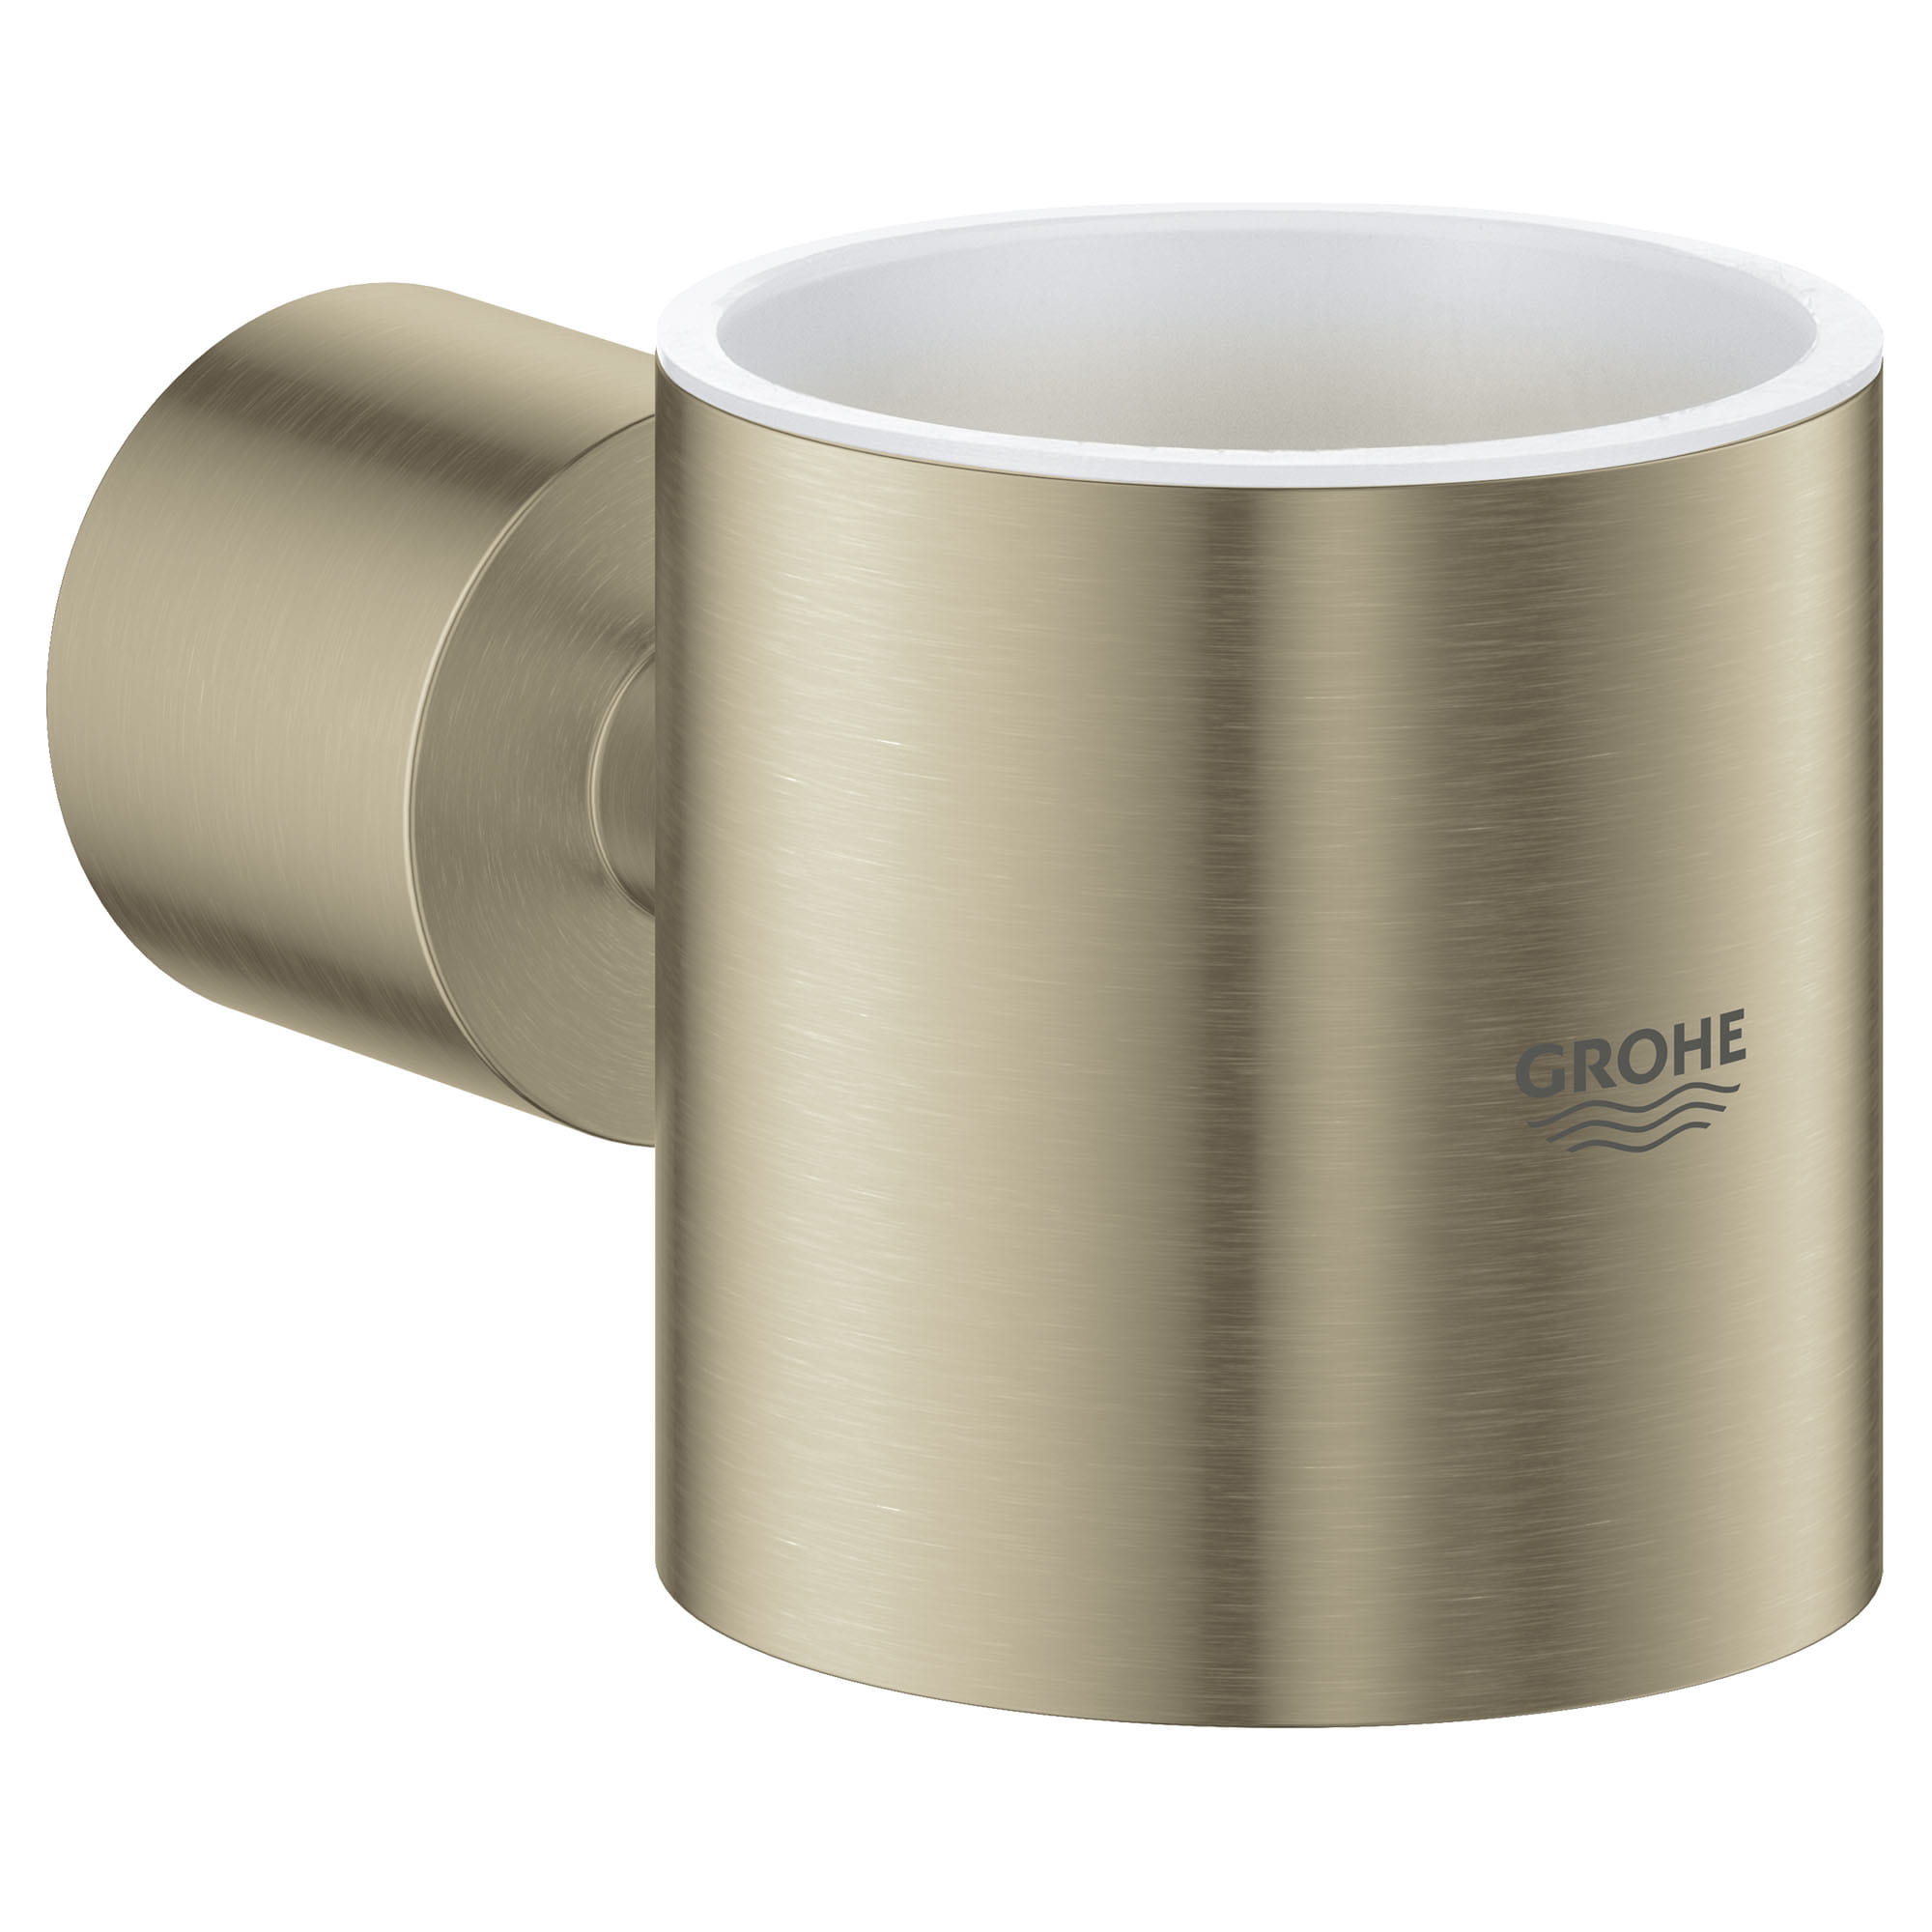 Support pour gobelet GROHE BRUSHED NICKEL